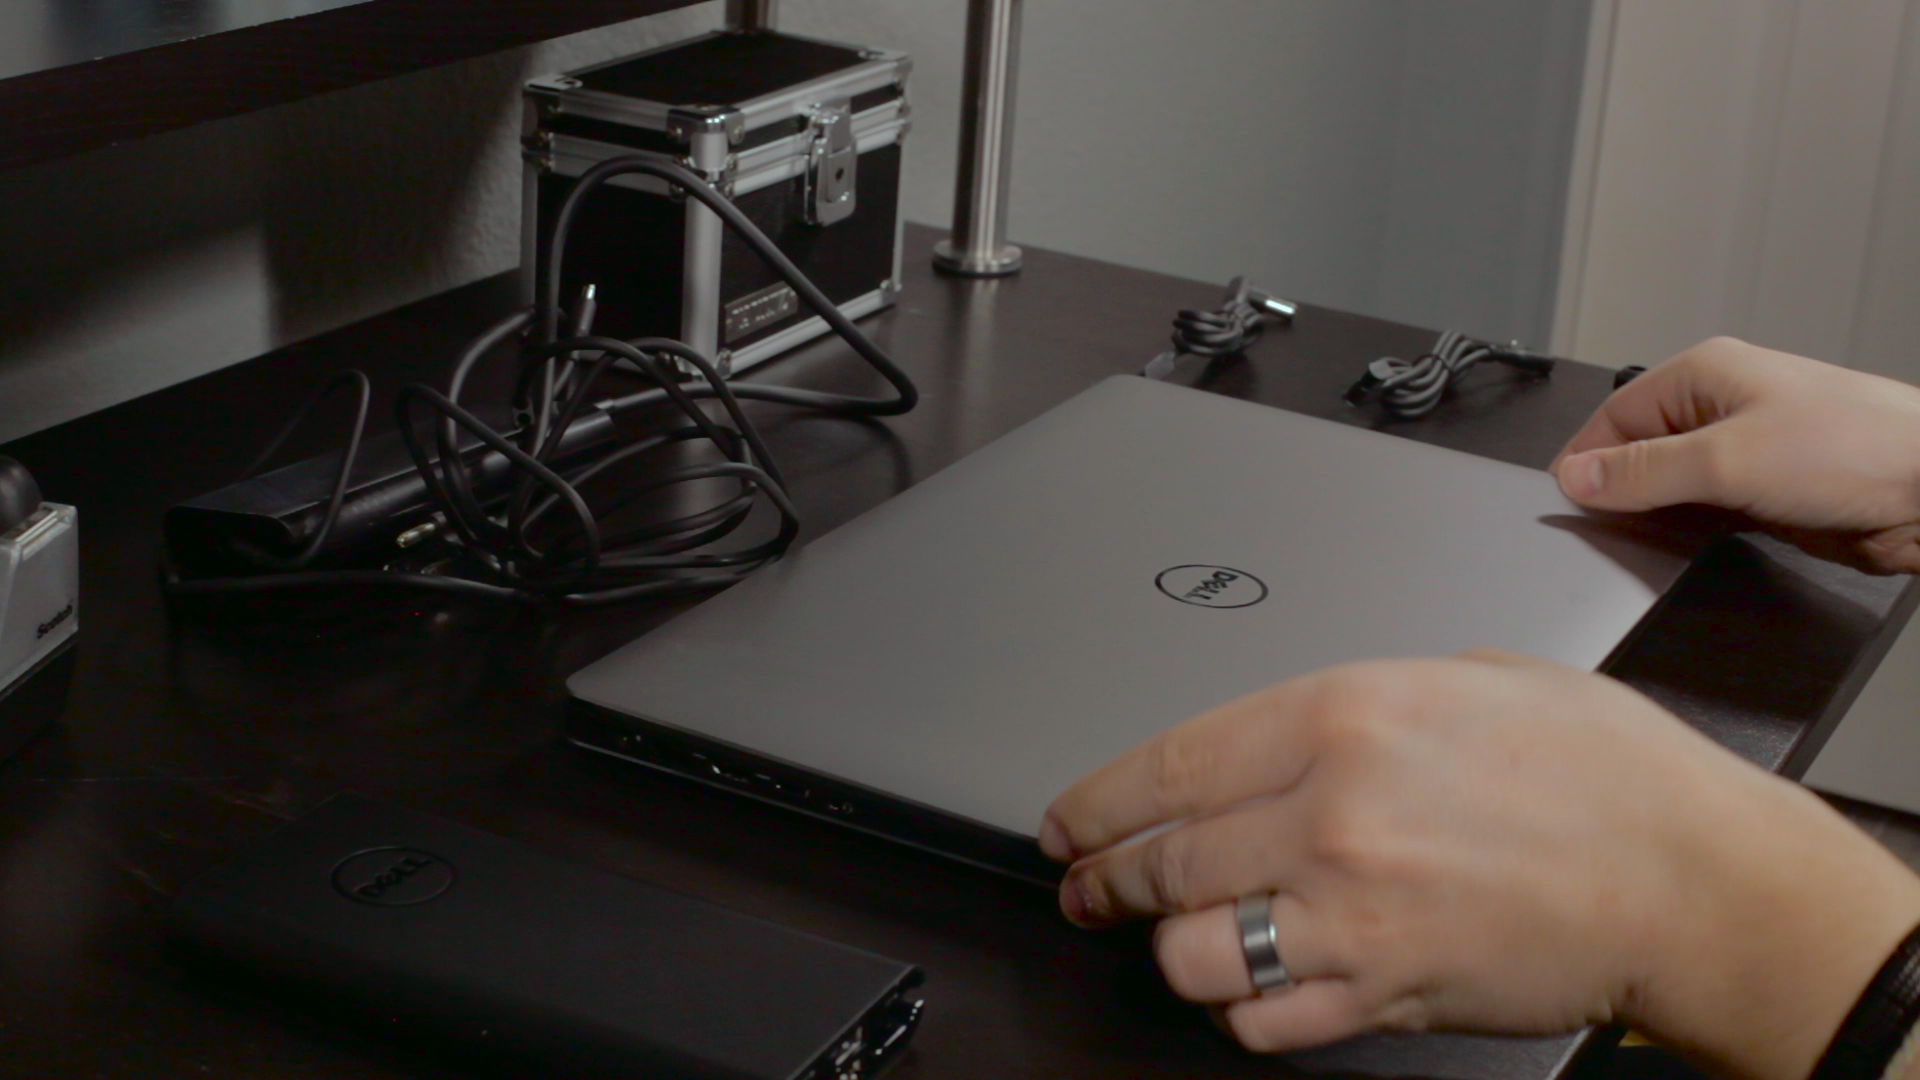 Unboxing the Dell XPS 15 notebook running Windows 10 (video) - OnMSFT.com - February 5, 2016